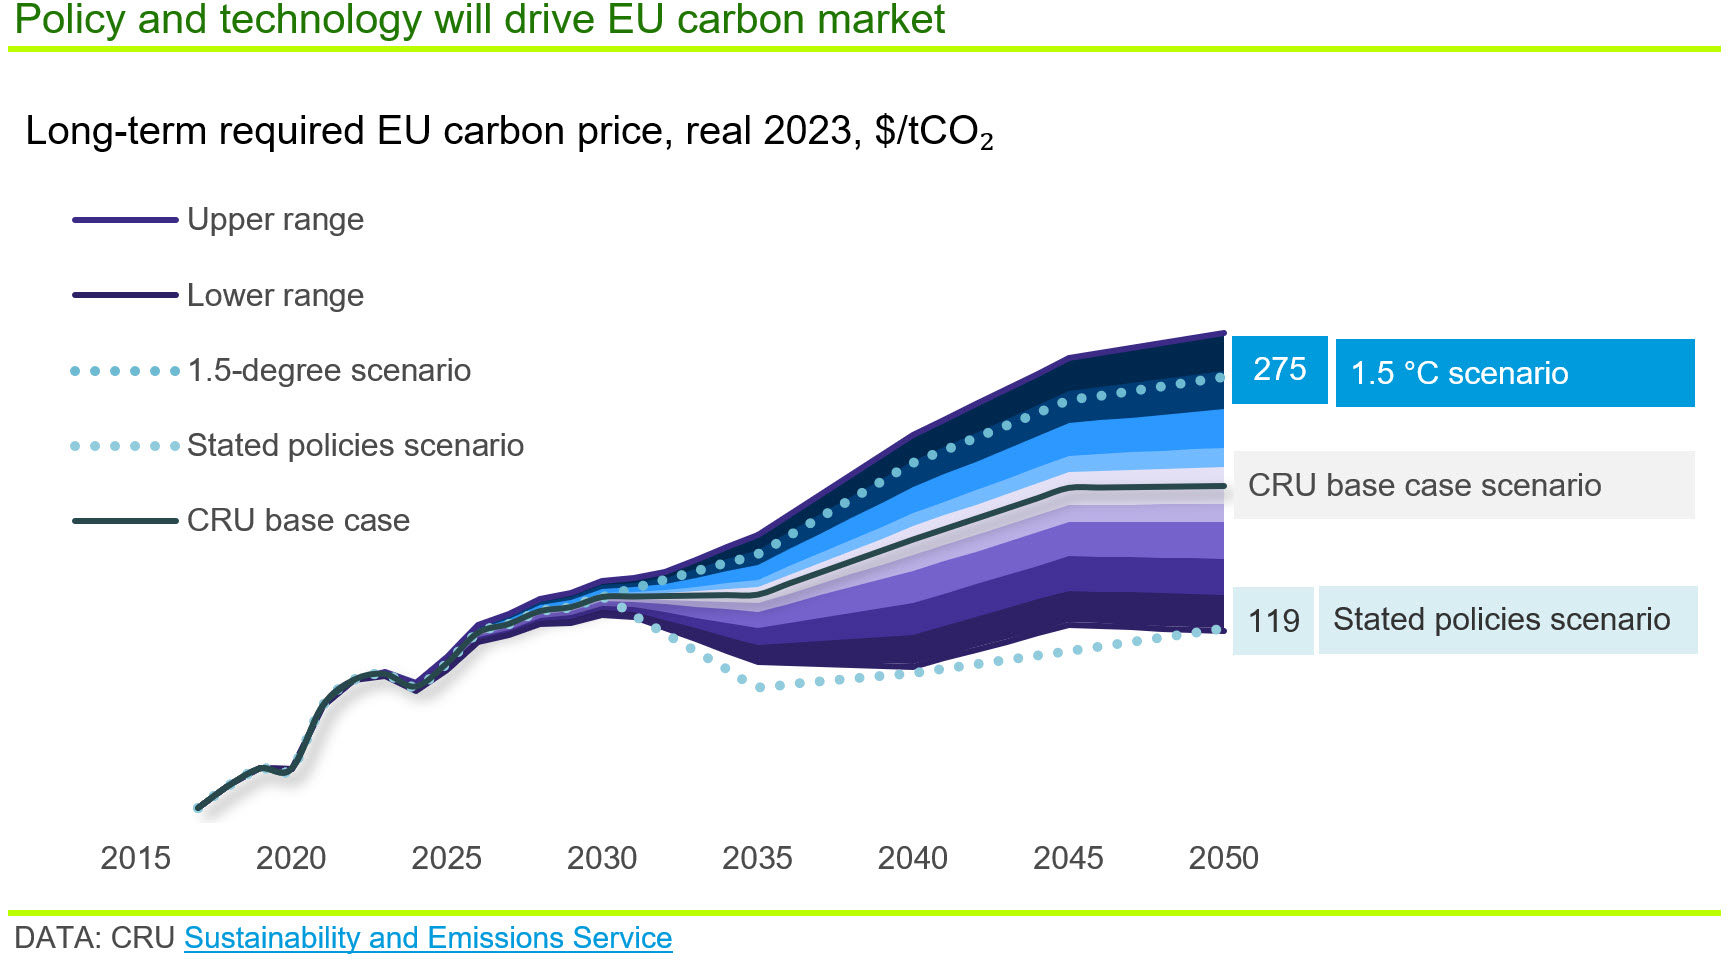 Graph showing that policy and technology will drive EU carbon market